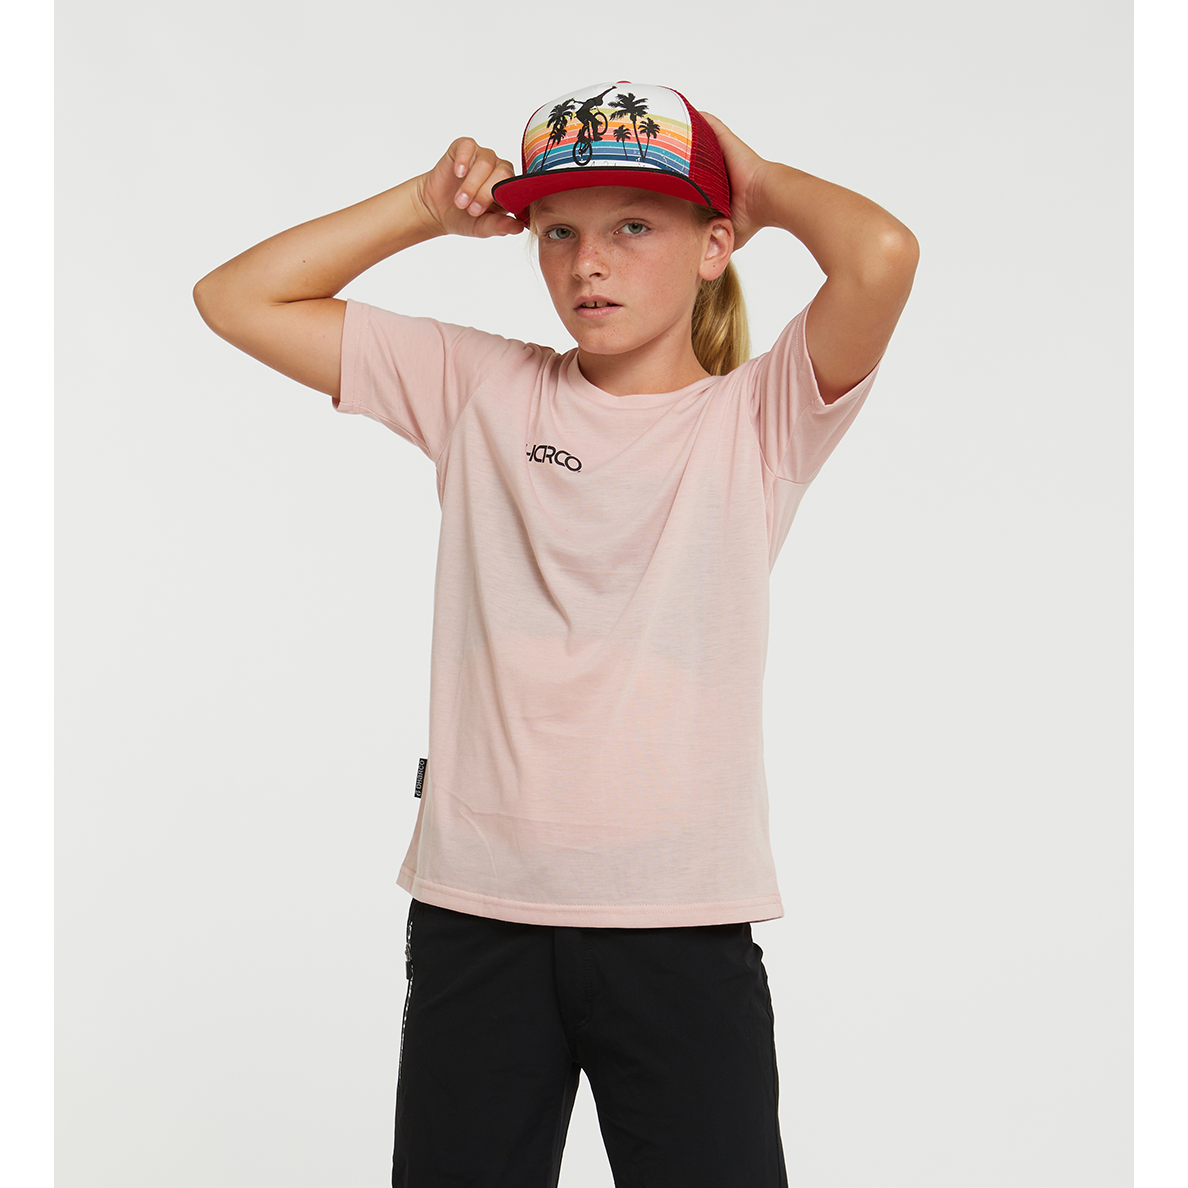 DHaRCO Youth Short Sleeve Tech Tee - Youth 2XL - Arvo Session